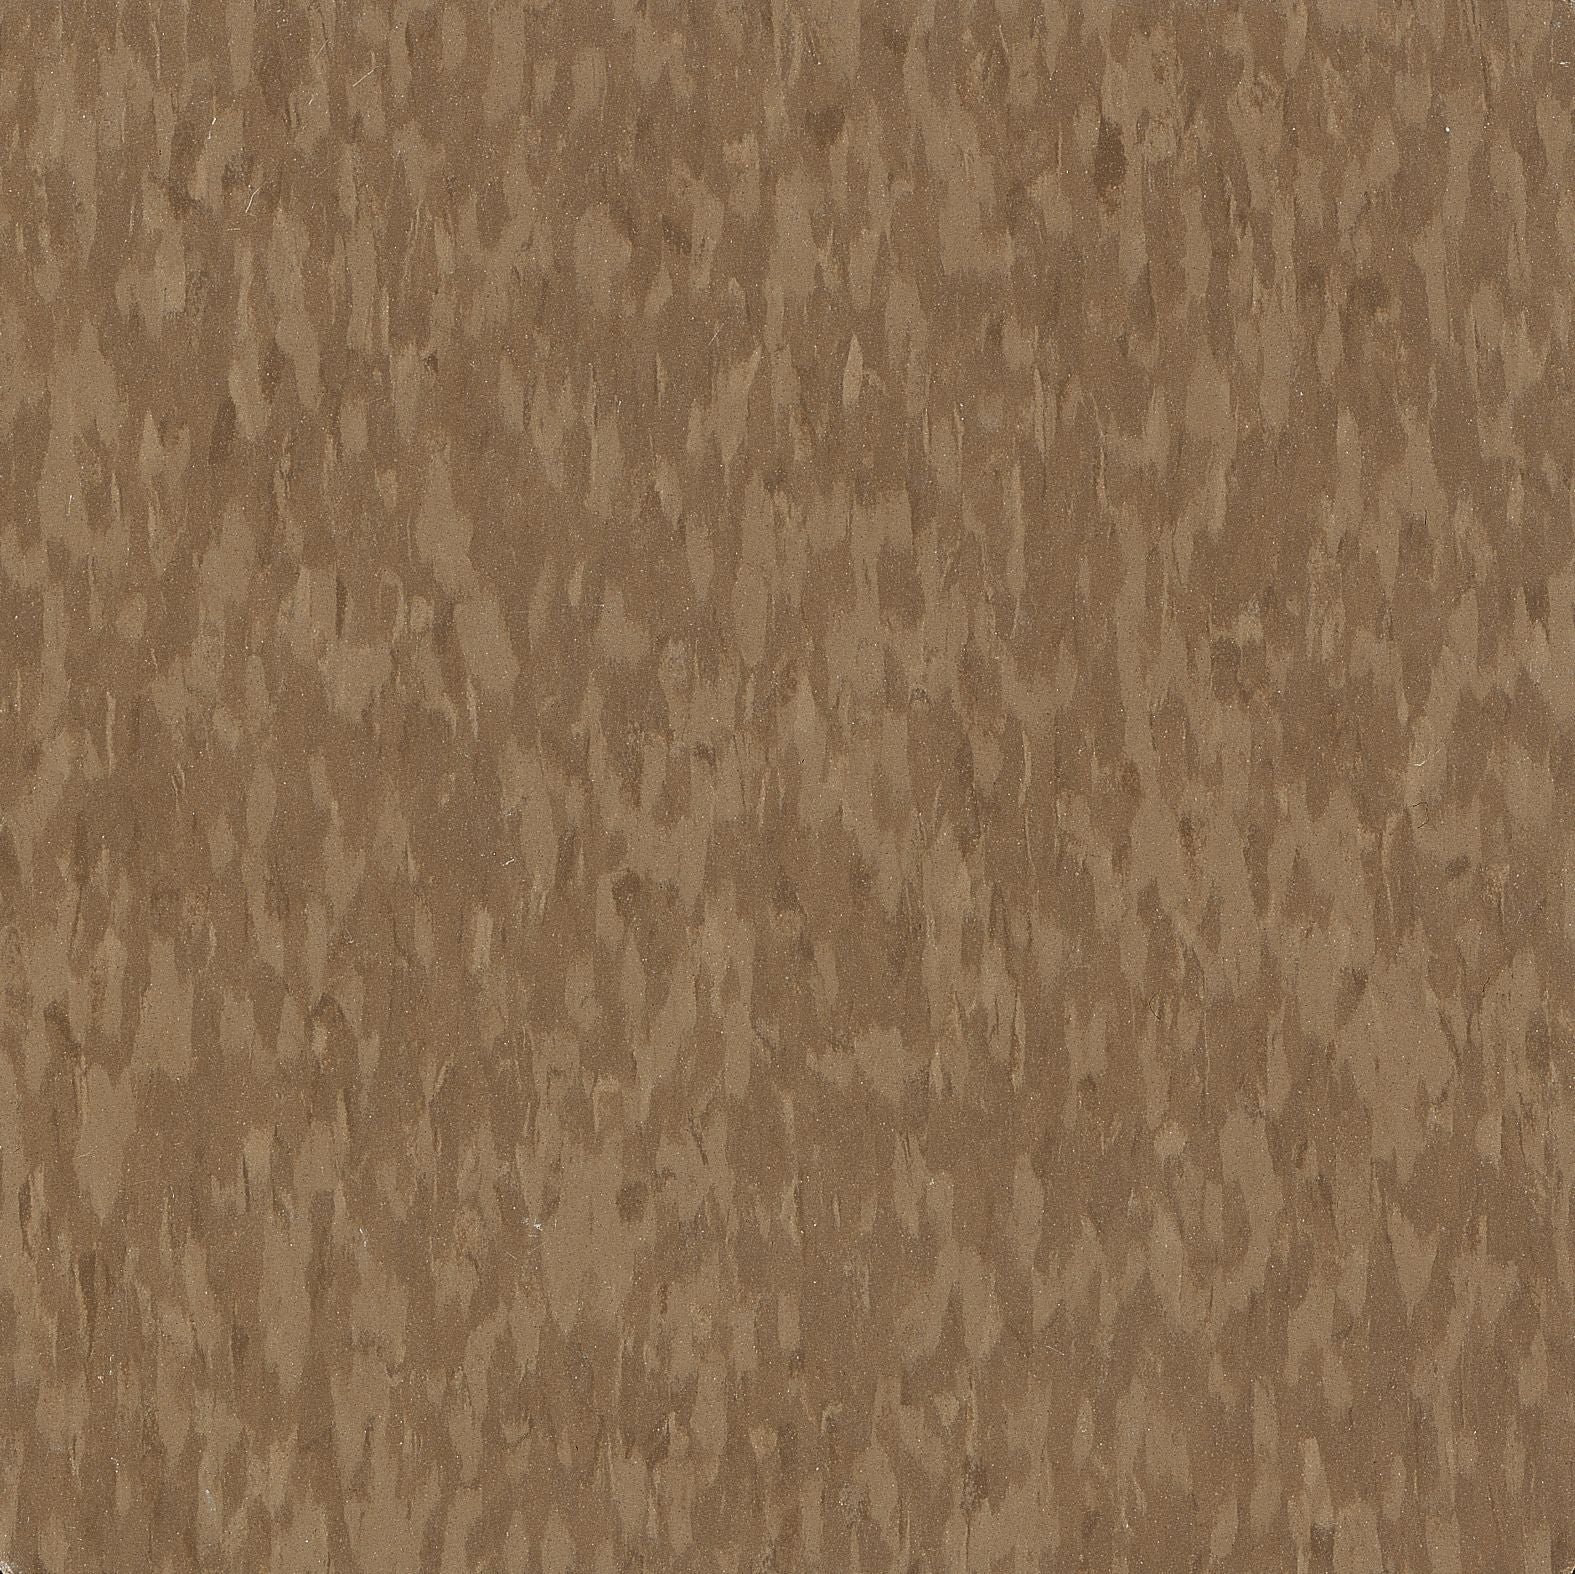 Armstrong Flooring Imperial Texture VCT Humus 125-mil x 12-in W x 12-in L Commercial Vinyl Tile Flooring (45-sq ft/ Carton)